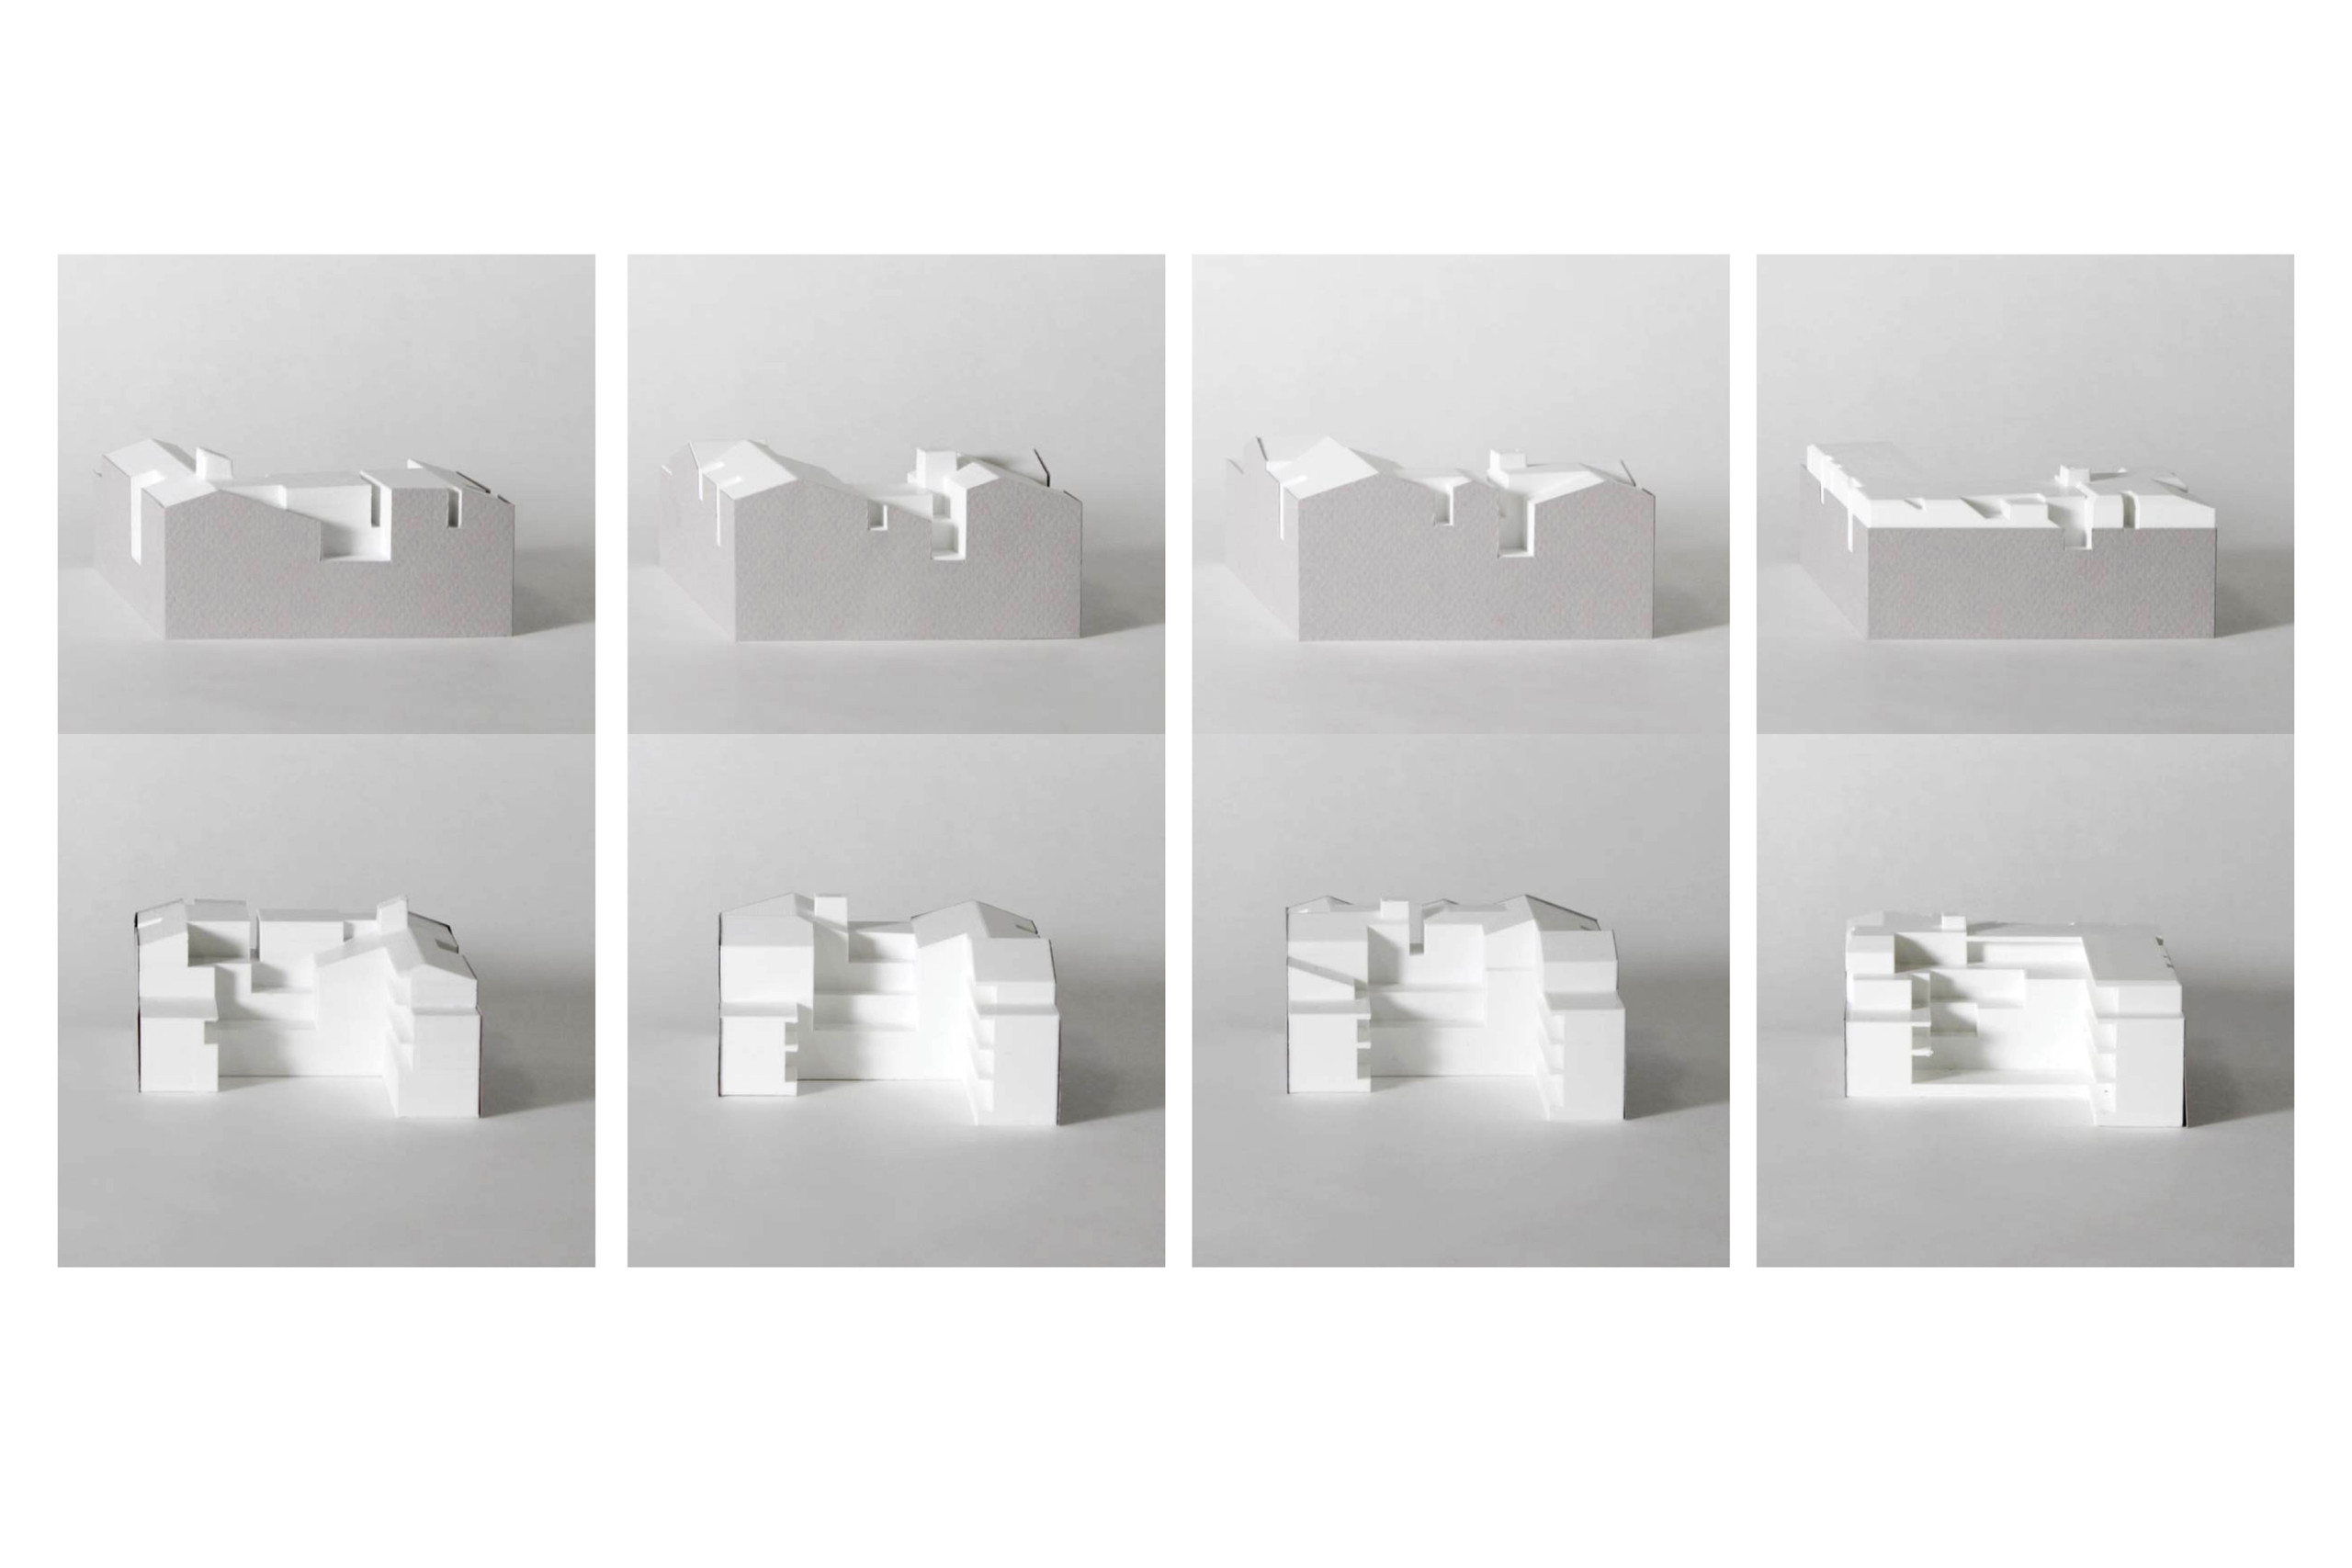 A series of white and grey massing models with interior spaces carved out.